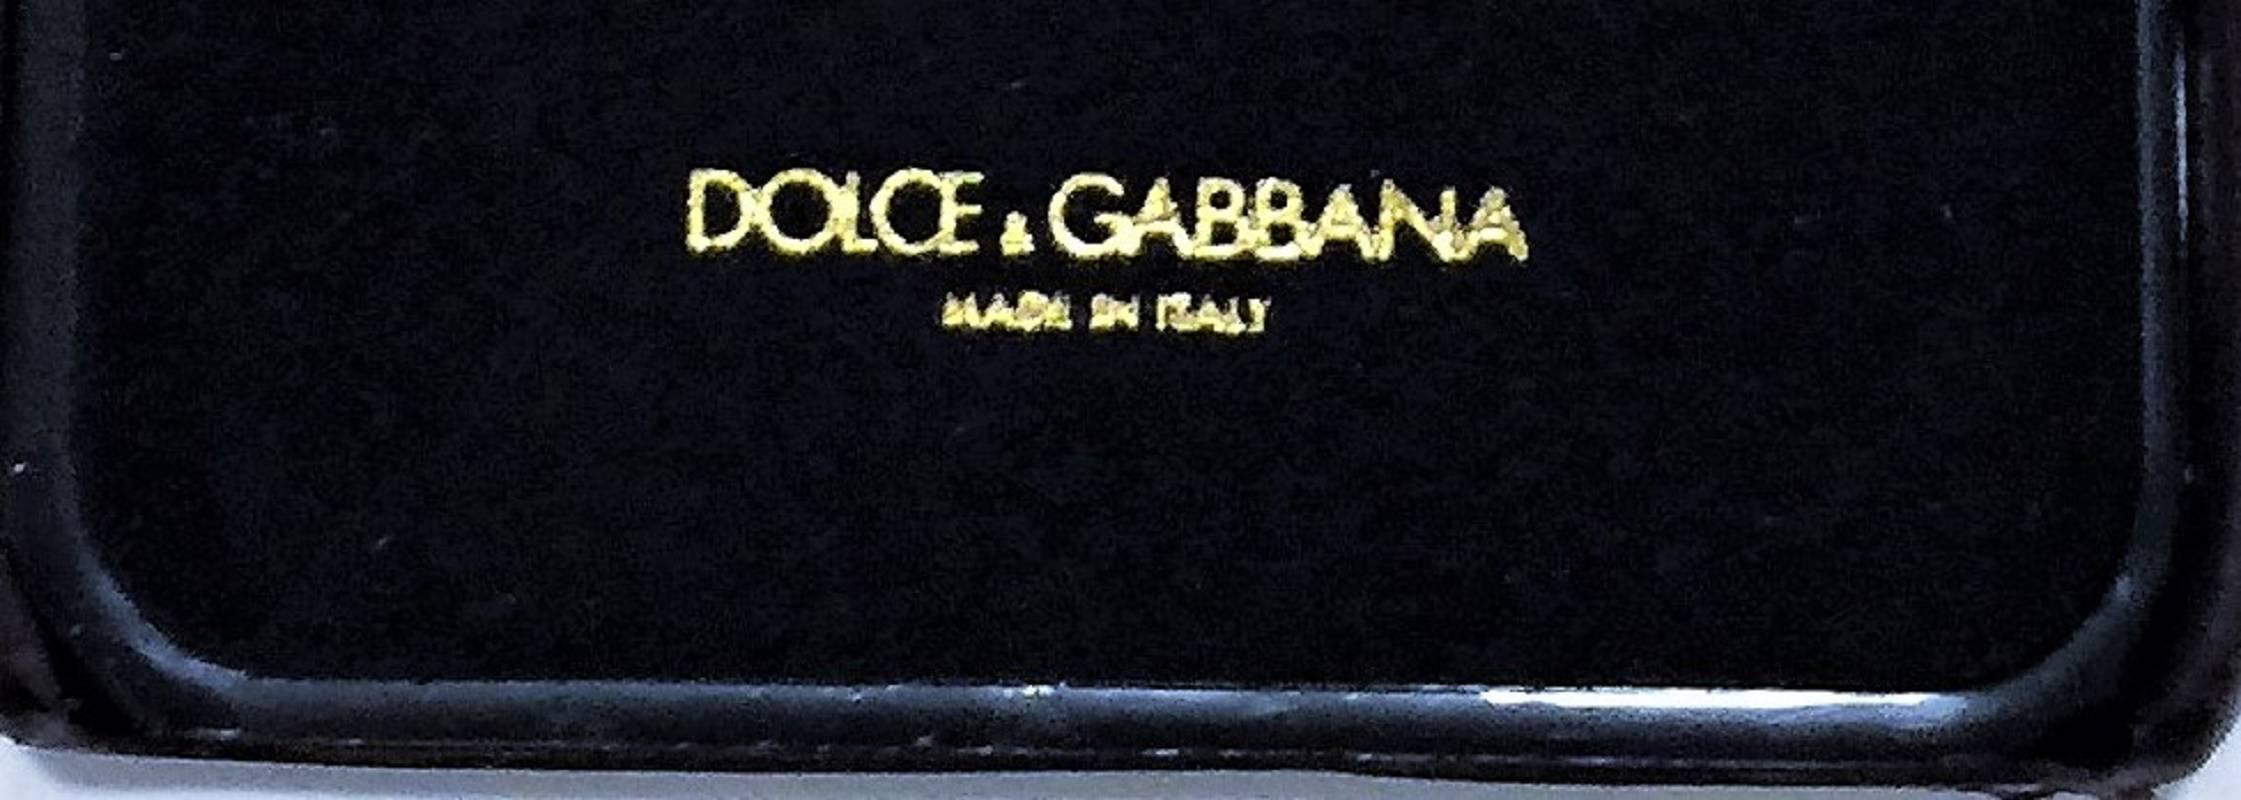 Dolce & Gabbana Crystal Embellished iPhone 6 Case.  Current model. Bordeaux calf leather, crystal embellished, featuring a lizard skin effect, rhinestone crystal floral embellishment.  Made in Italy.  Suitable for iPhone 6 – not 6 Plus. Iguana